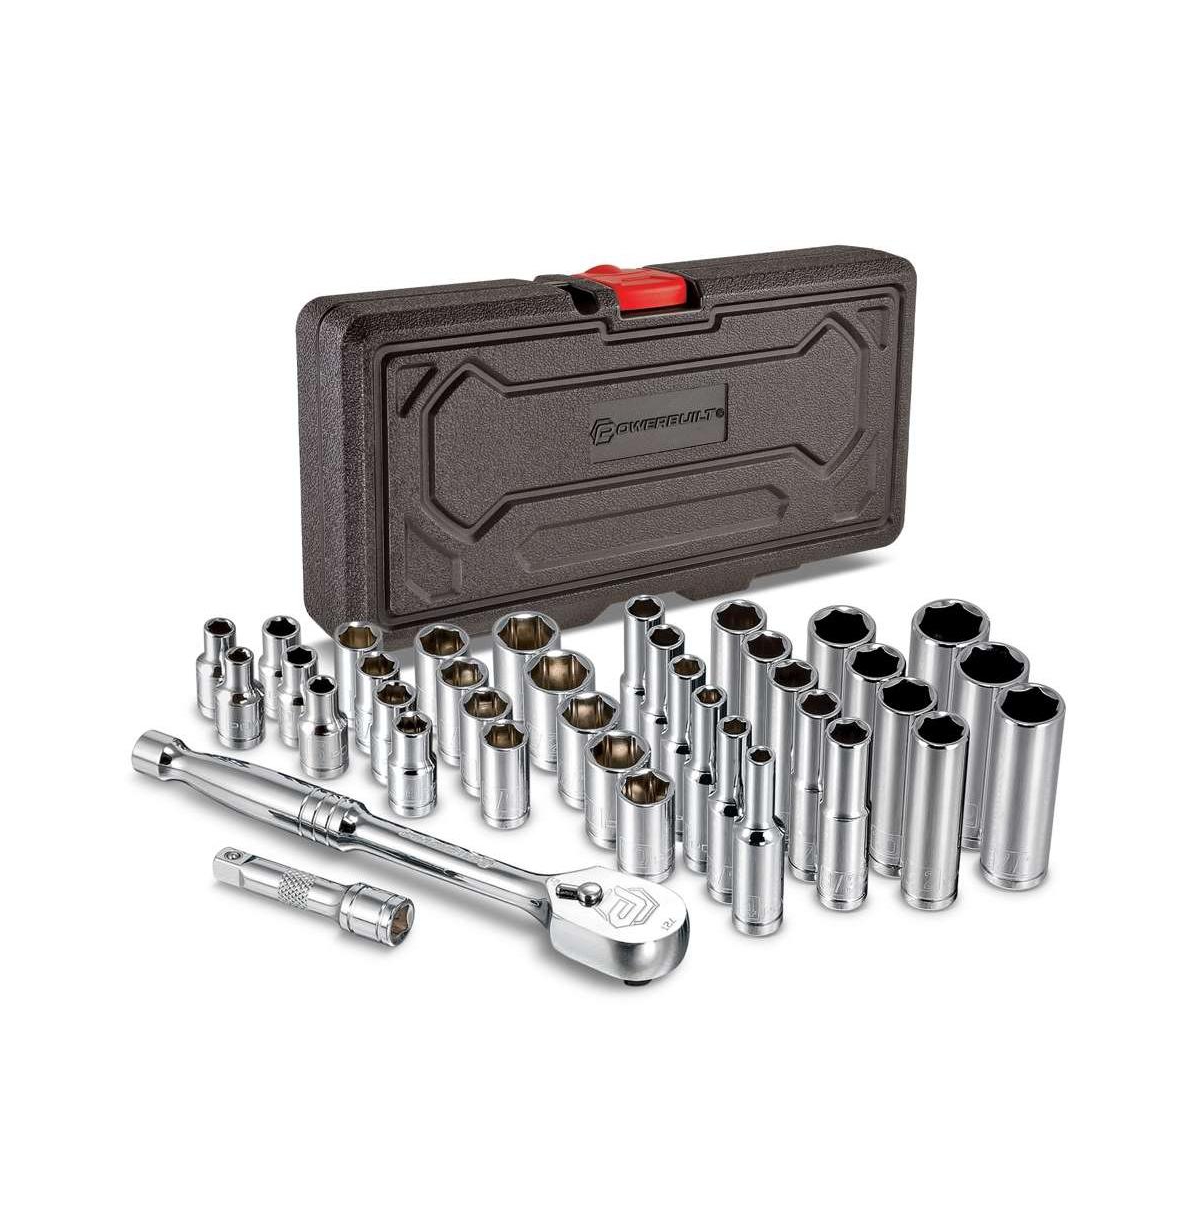 38 Piece 1/4 Inch Drive Tool Set with Sockets and Ratchet - Silver